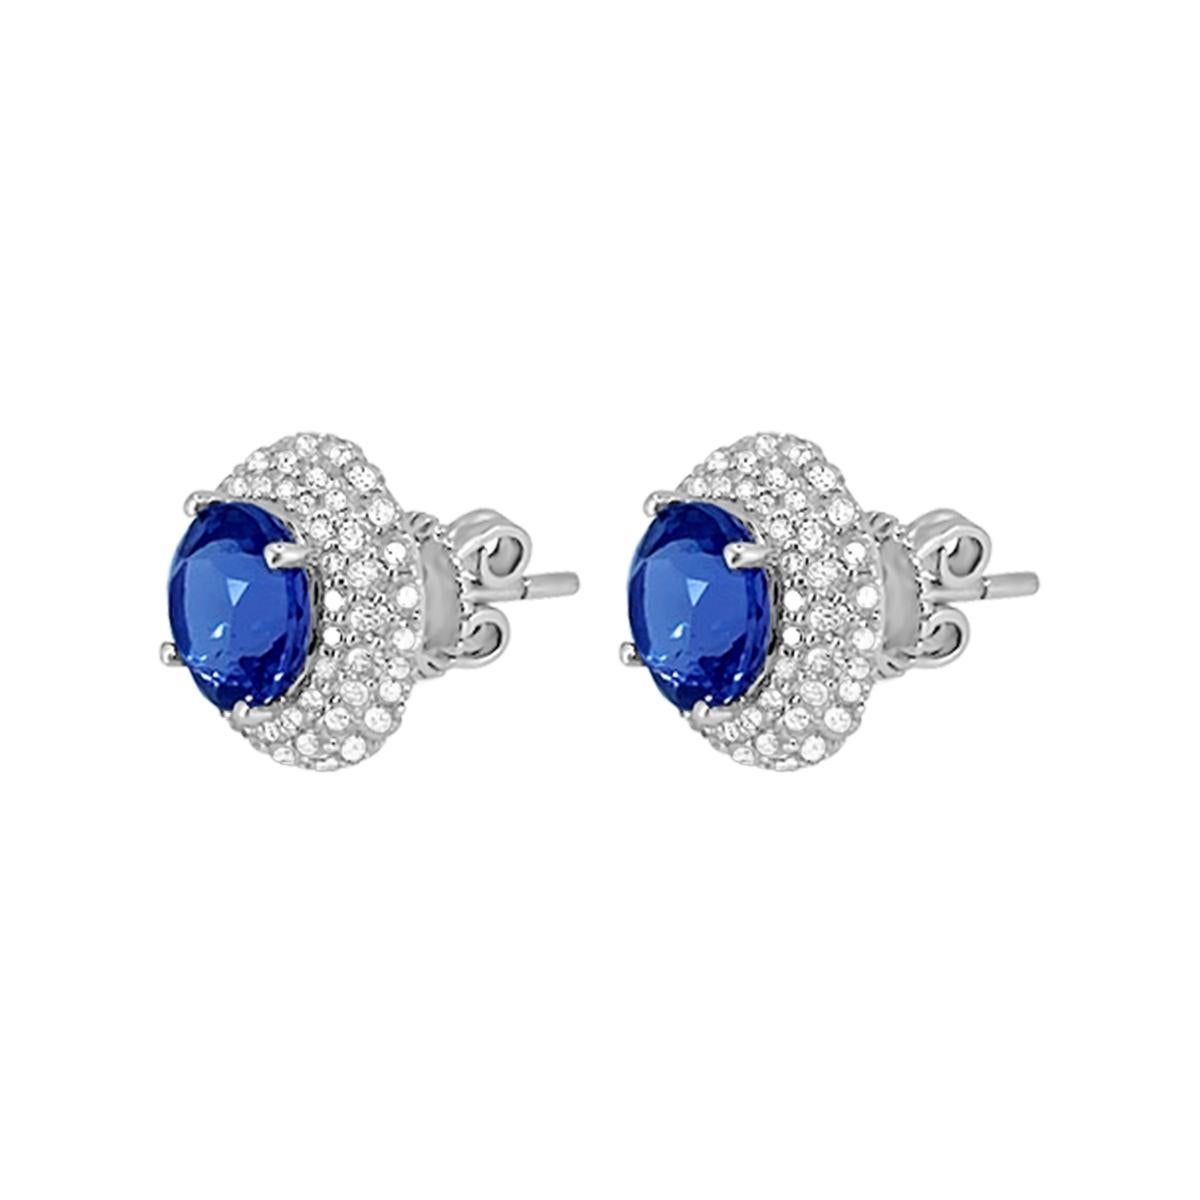 Beautiful stud with round Tanzanite. Fine color and cut. Surrounded by diamonds make it simple but still elegant.

Style# TS1132E
Tanzanite: Round 7mm 3.50cts
Diamond: 132pcs 1.21cts
